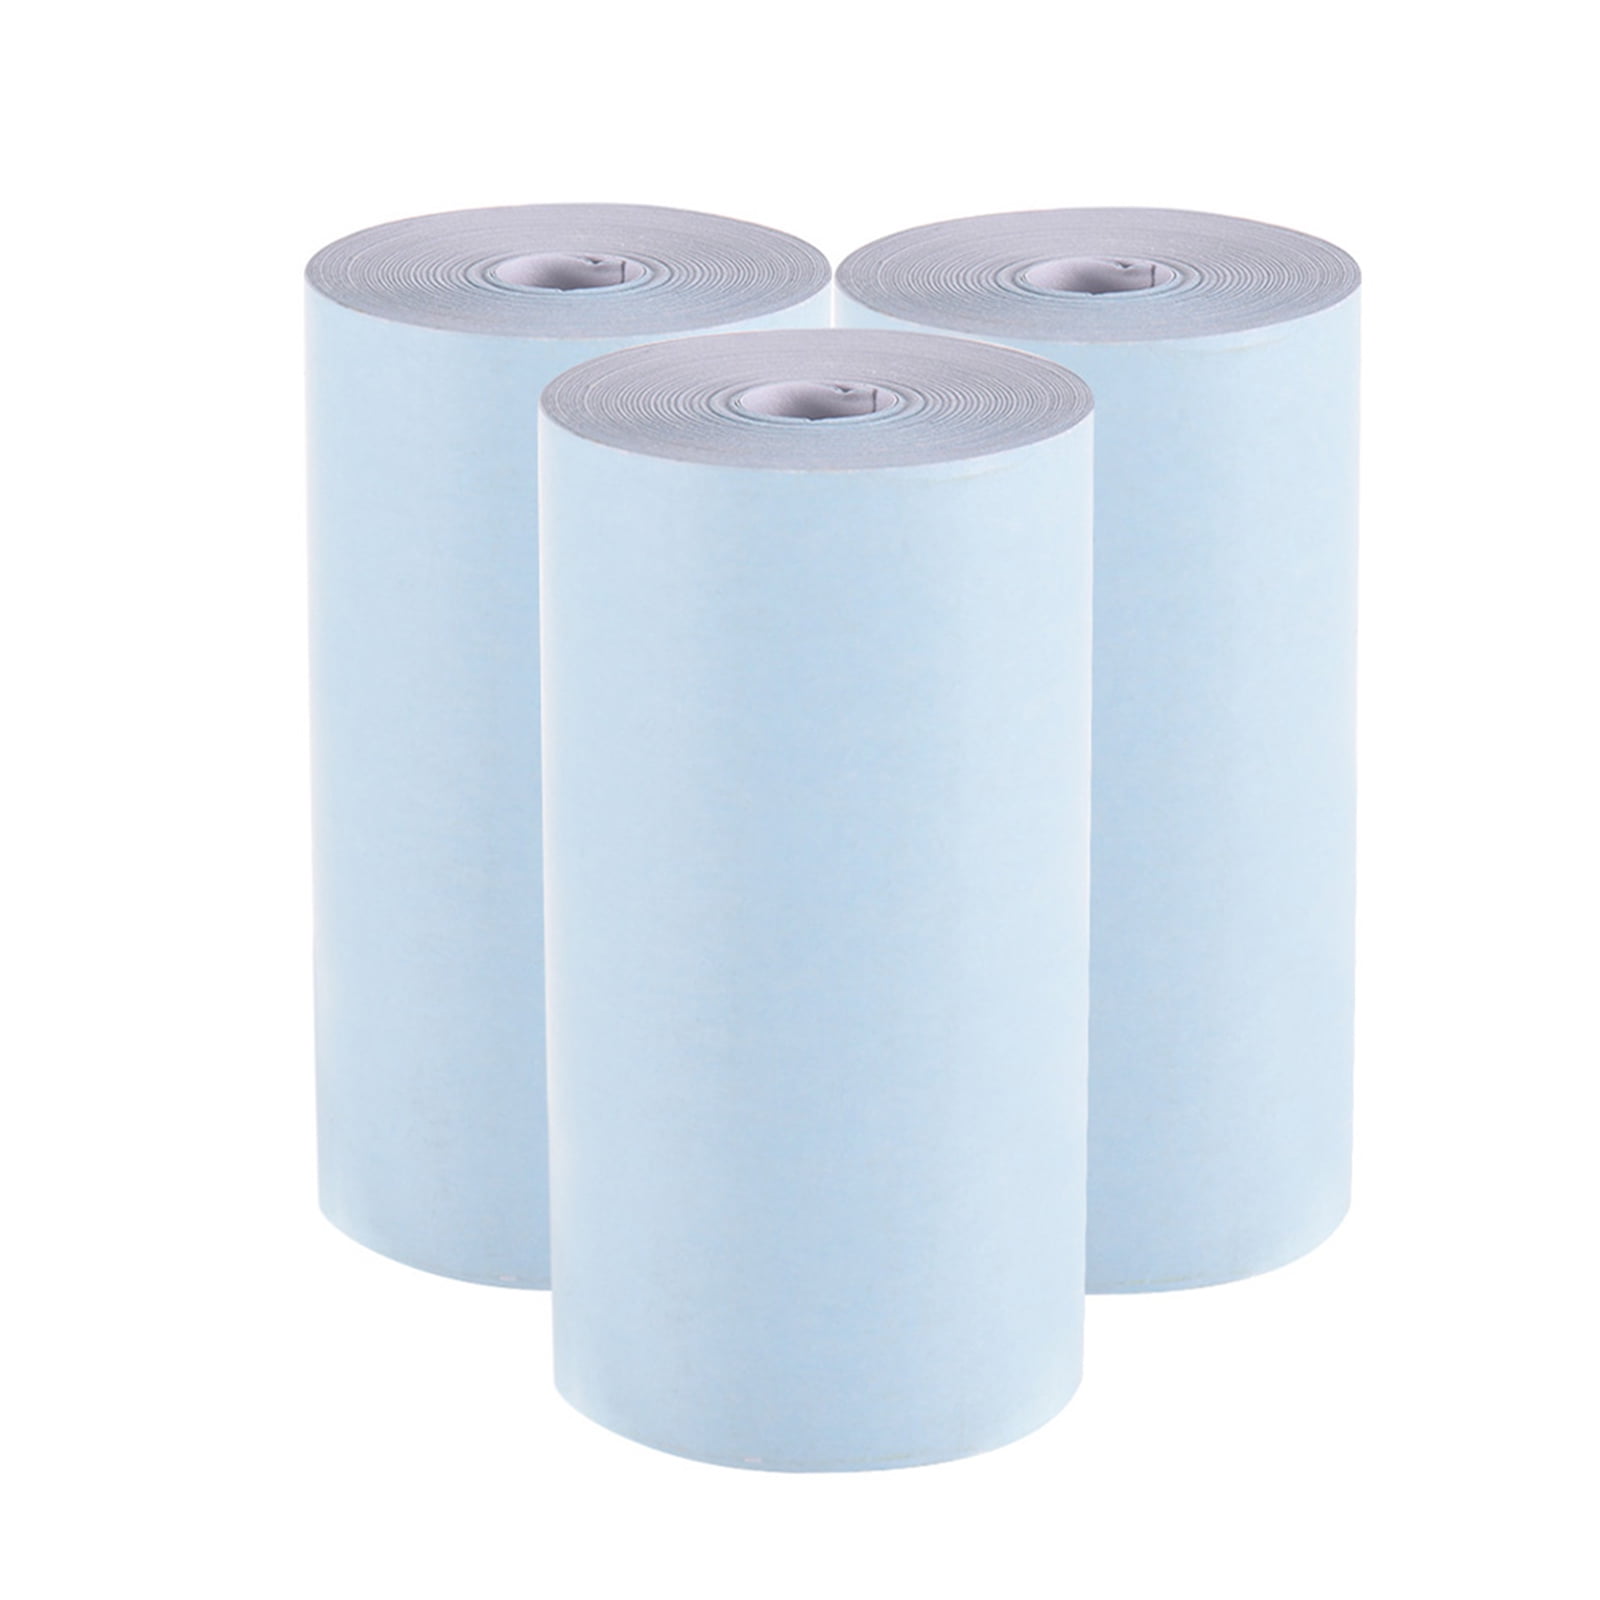 Aibecy Color Thermal Paper Roll 57 * 30mm Bill Receipt Photo Paper Clear Printing for PeriPage A6 Pocket Thermal Printer for PAPERANG P1/P2 Mini Photo Printer 2.17 * 1.18in 3 Rolls